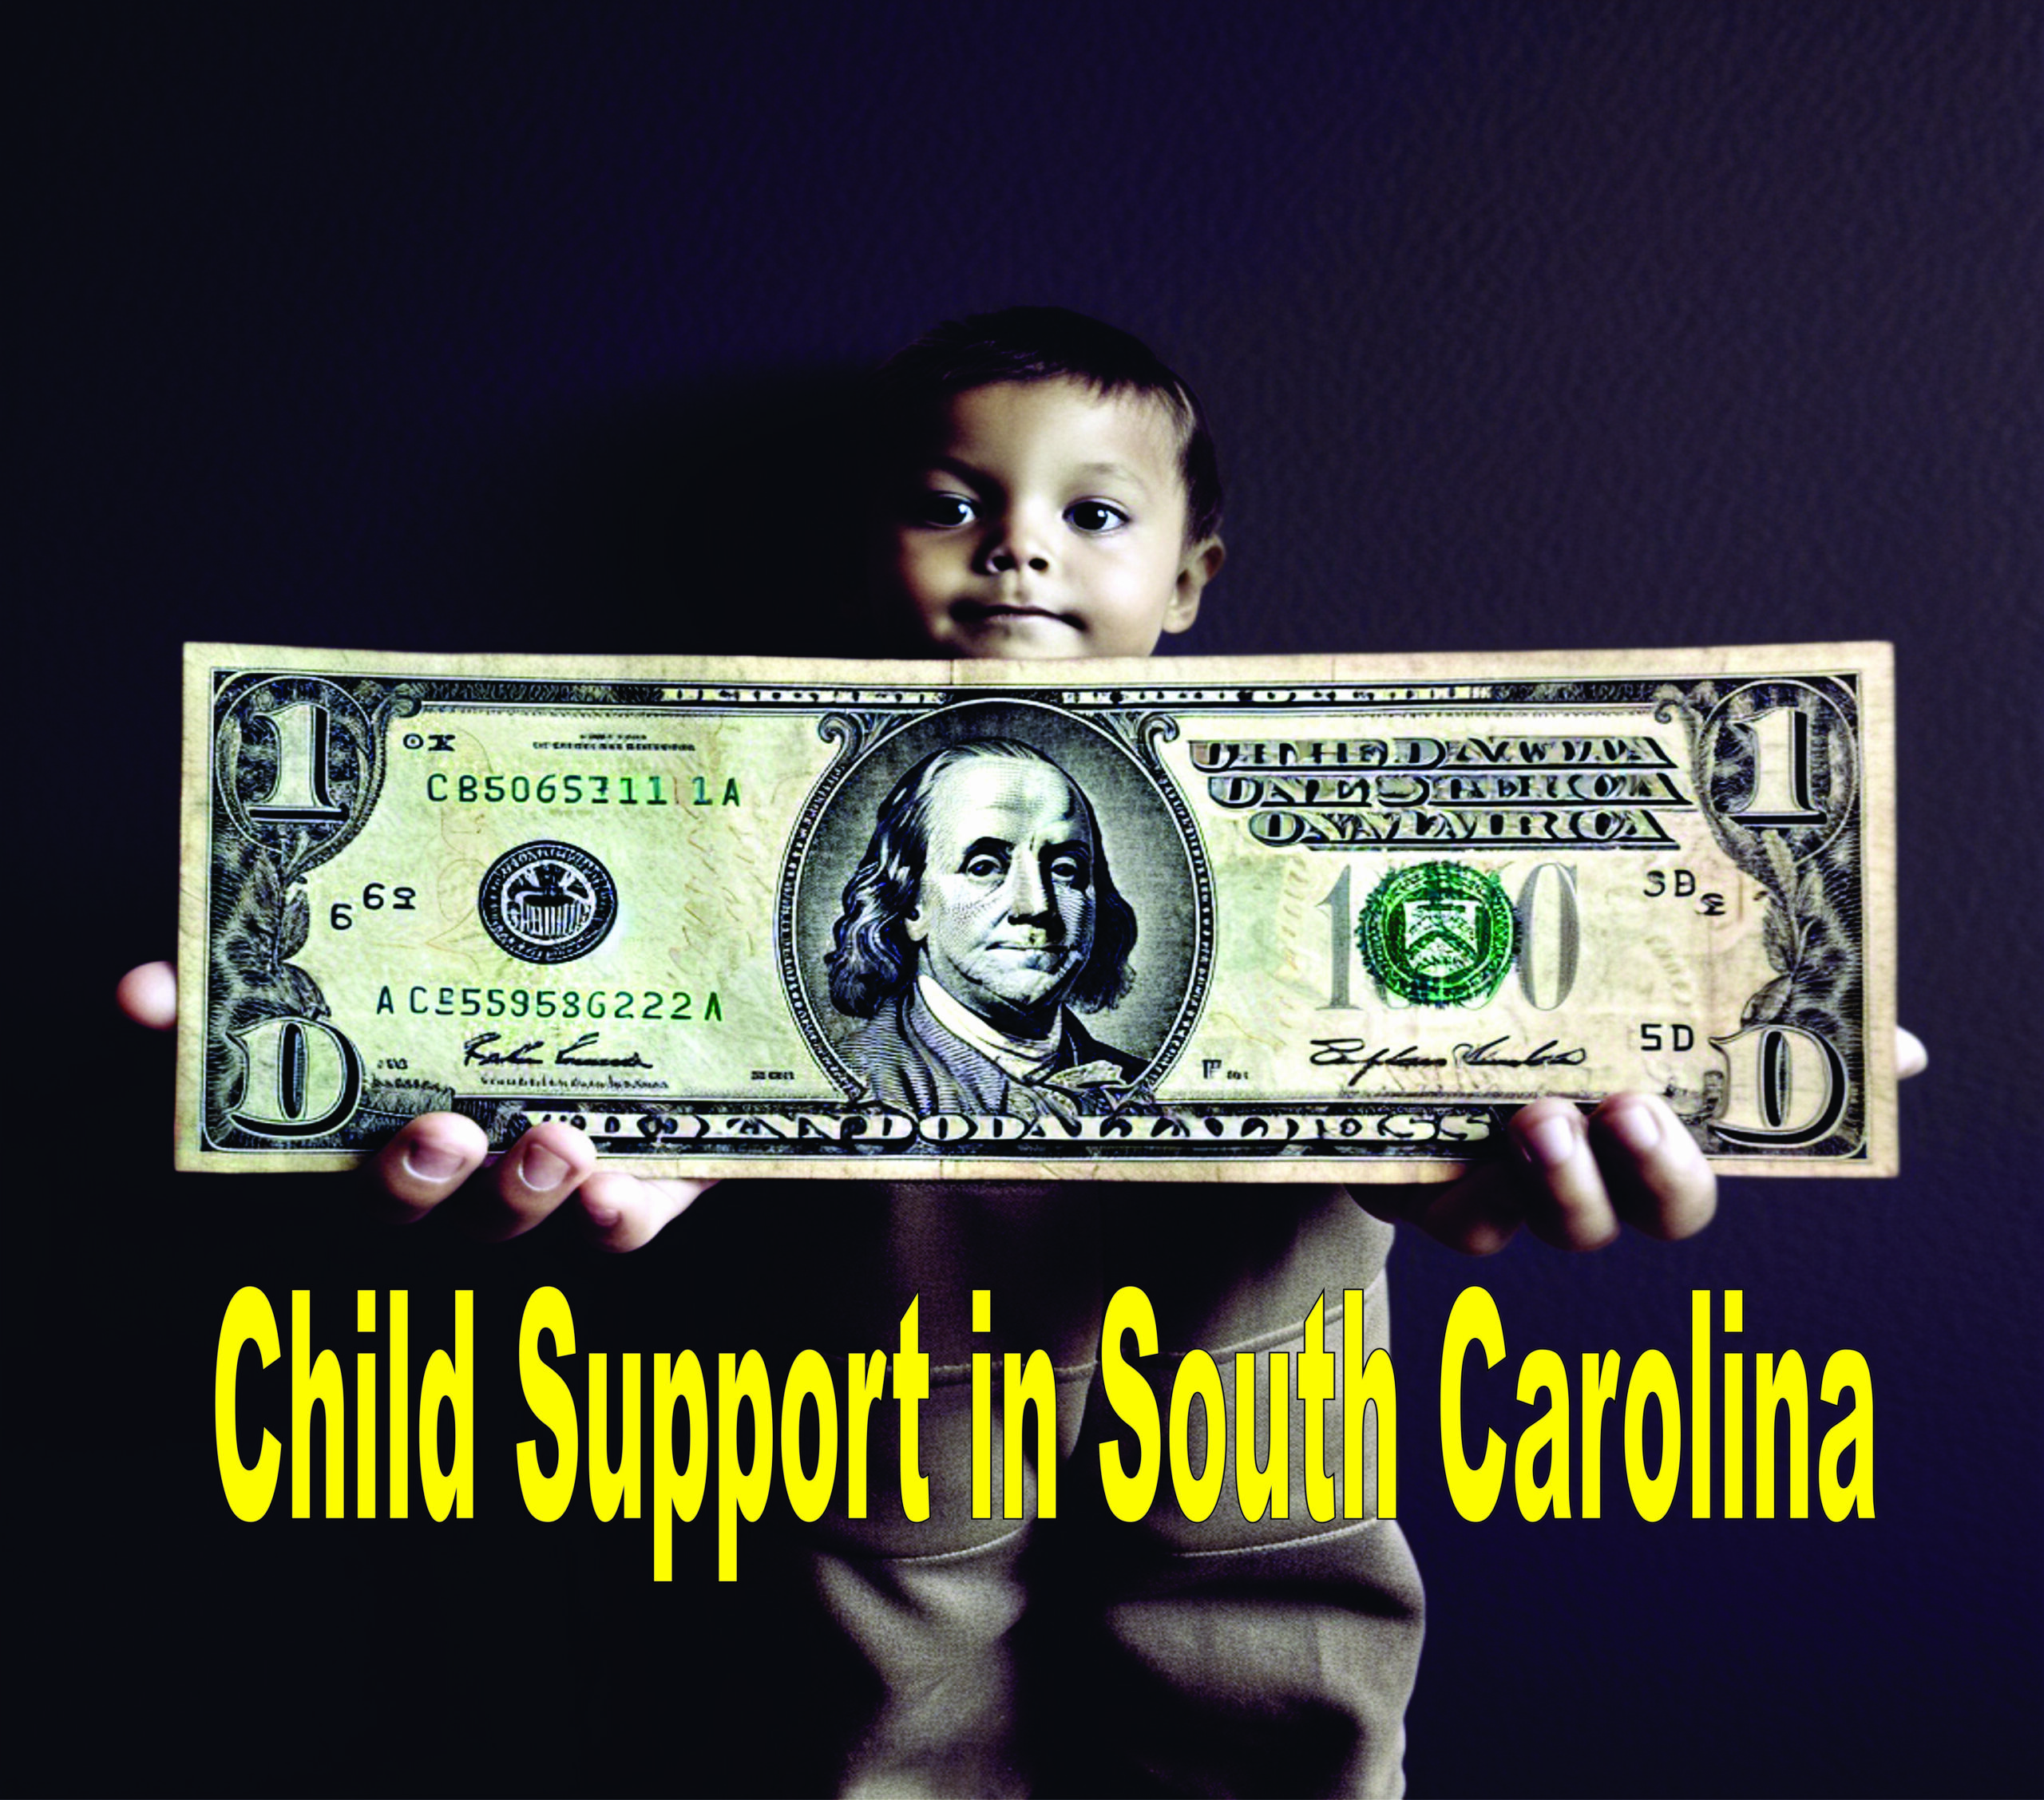 Child Support In South Carolina